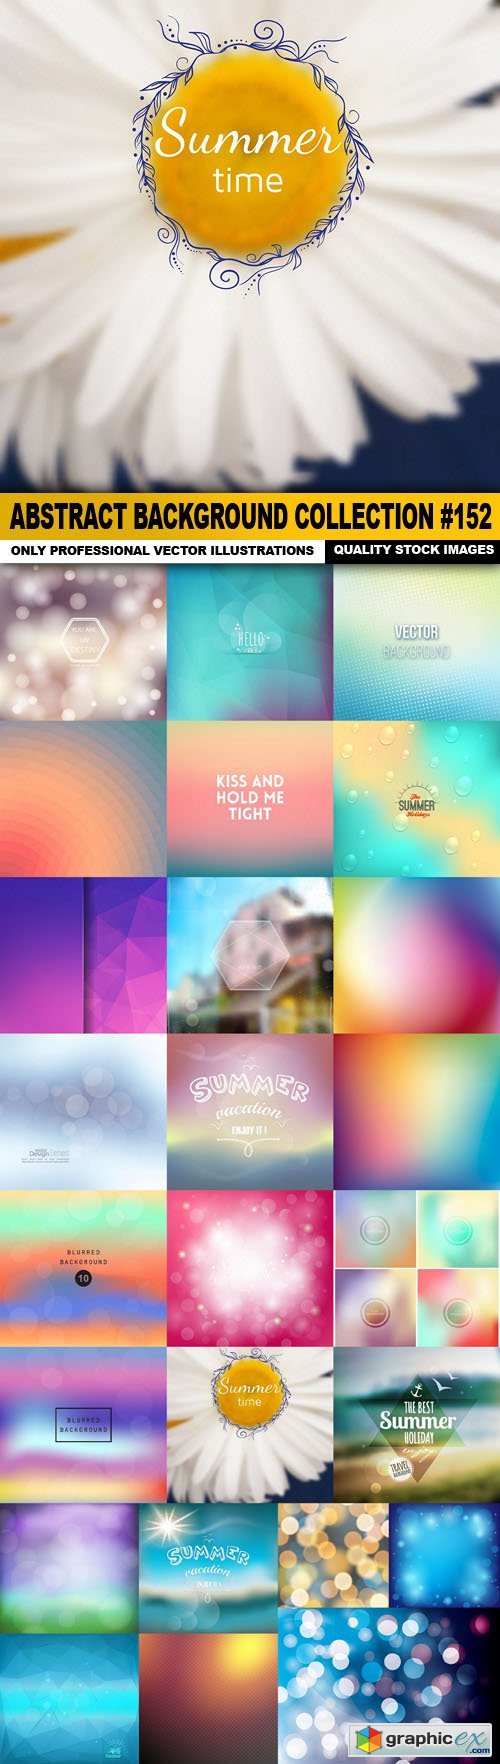 Abstract Background Collection #152